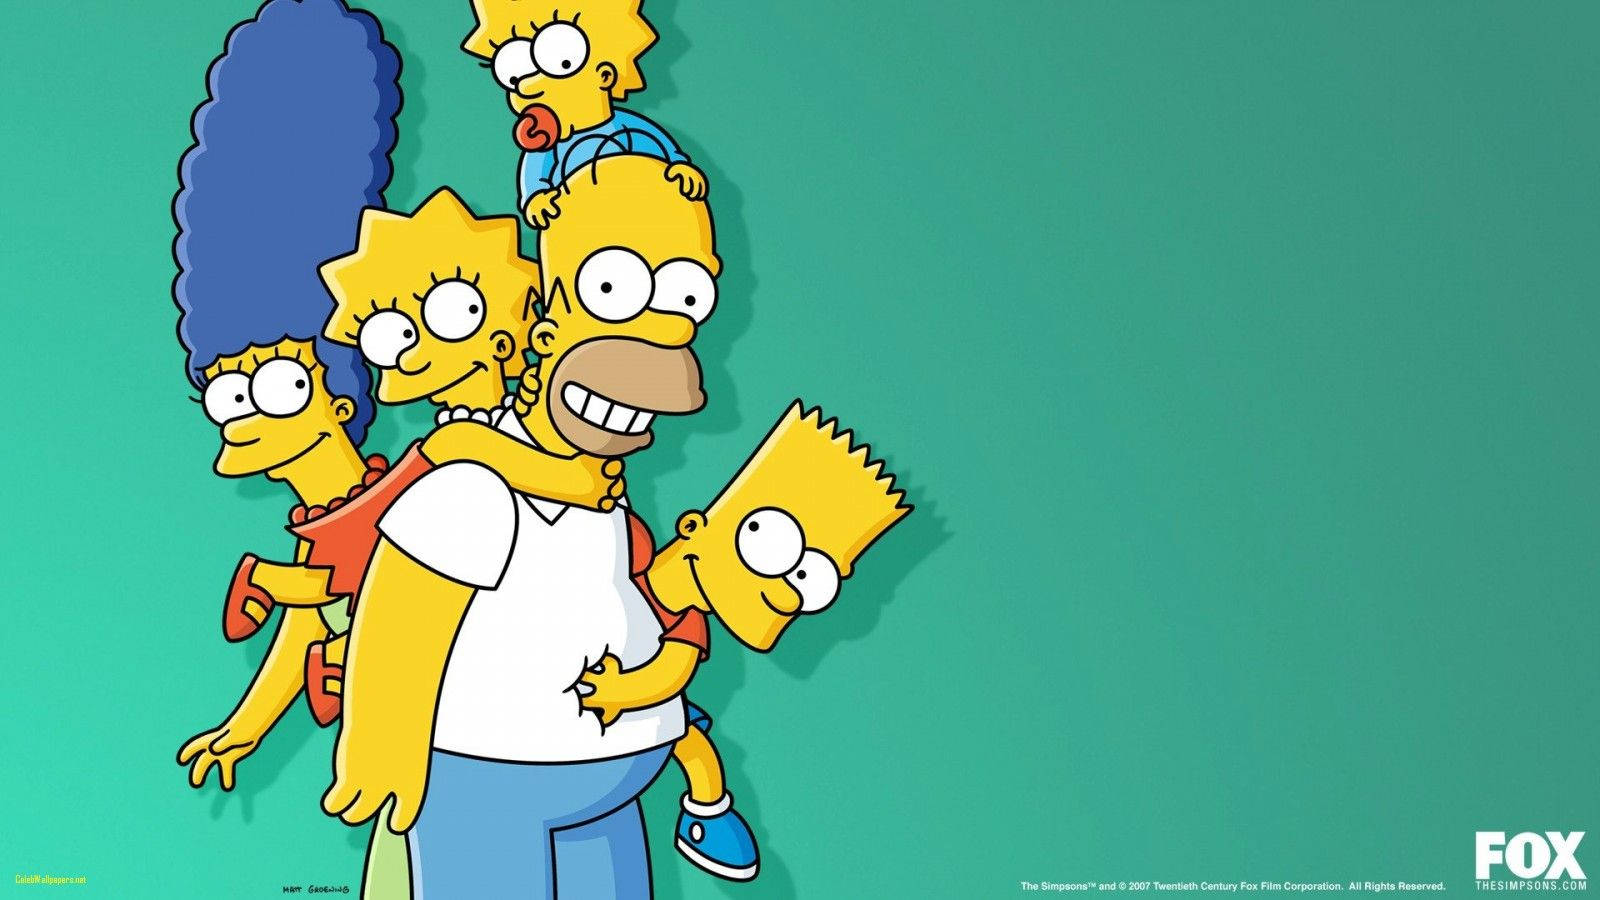 The Simpsons Family Wallpaper